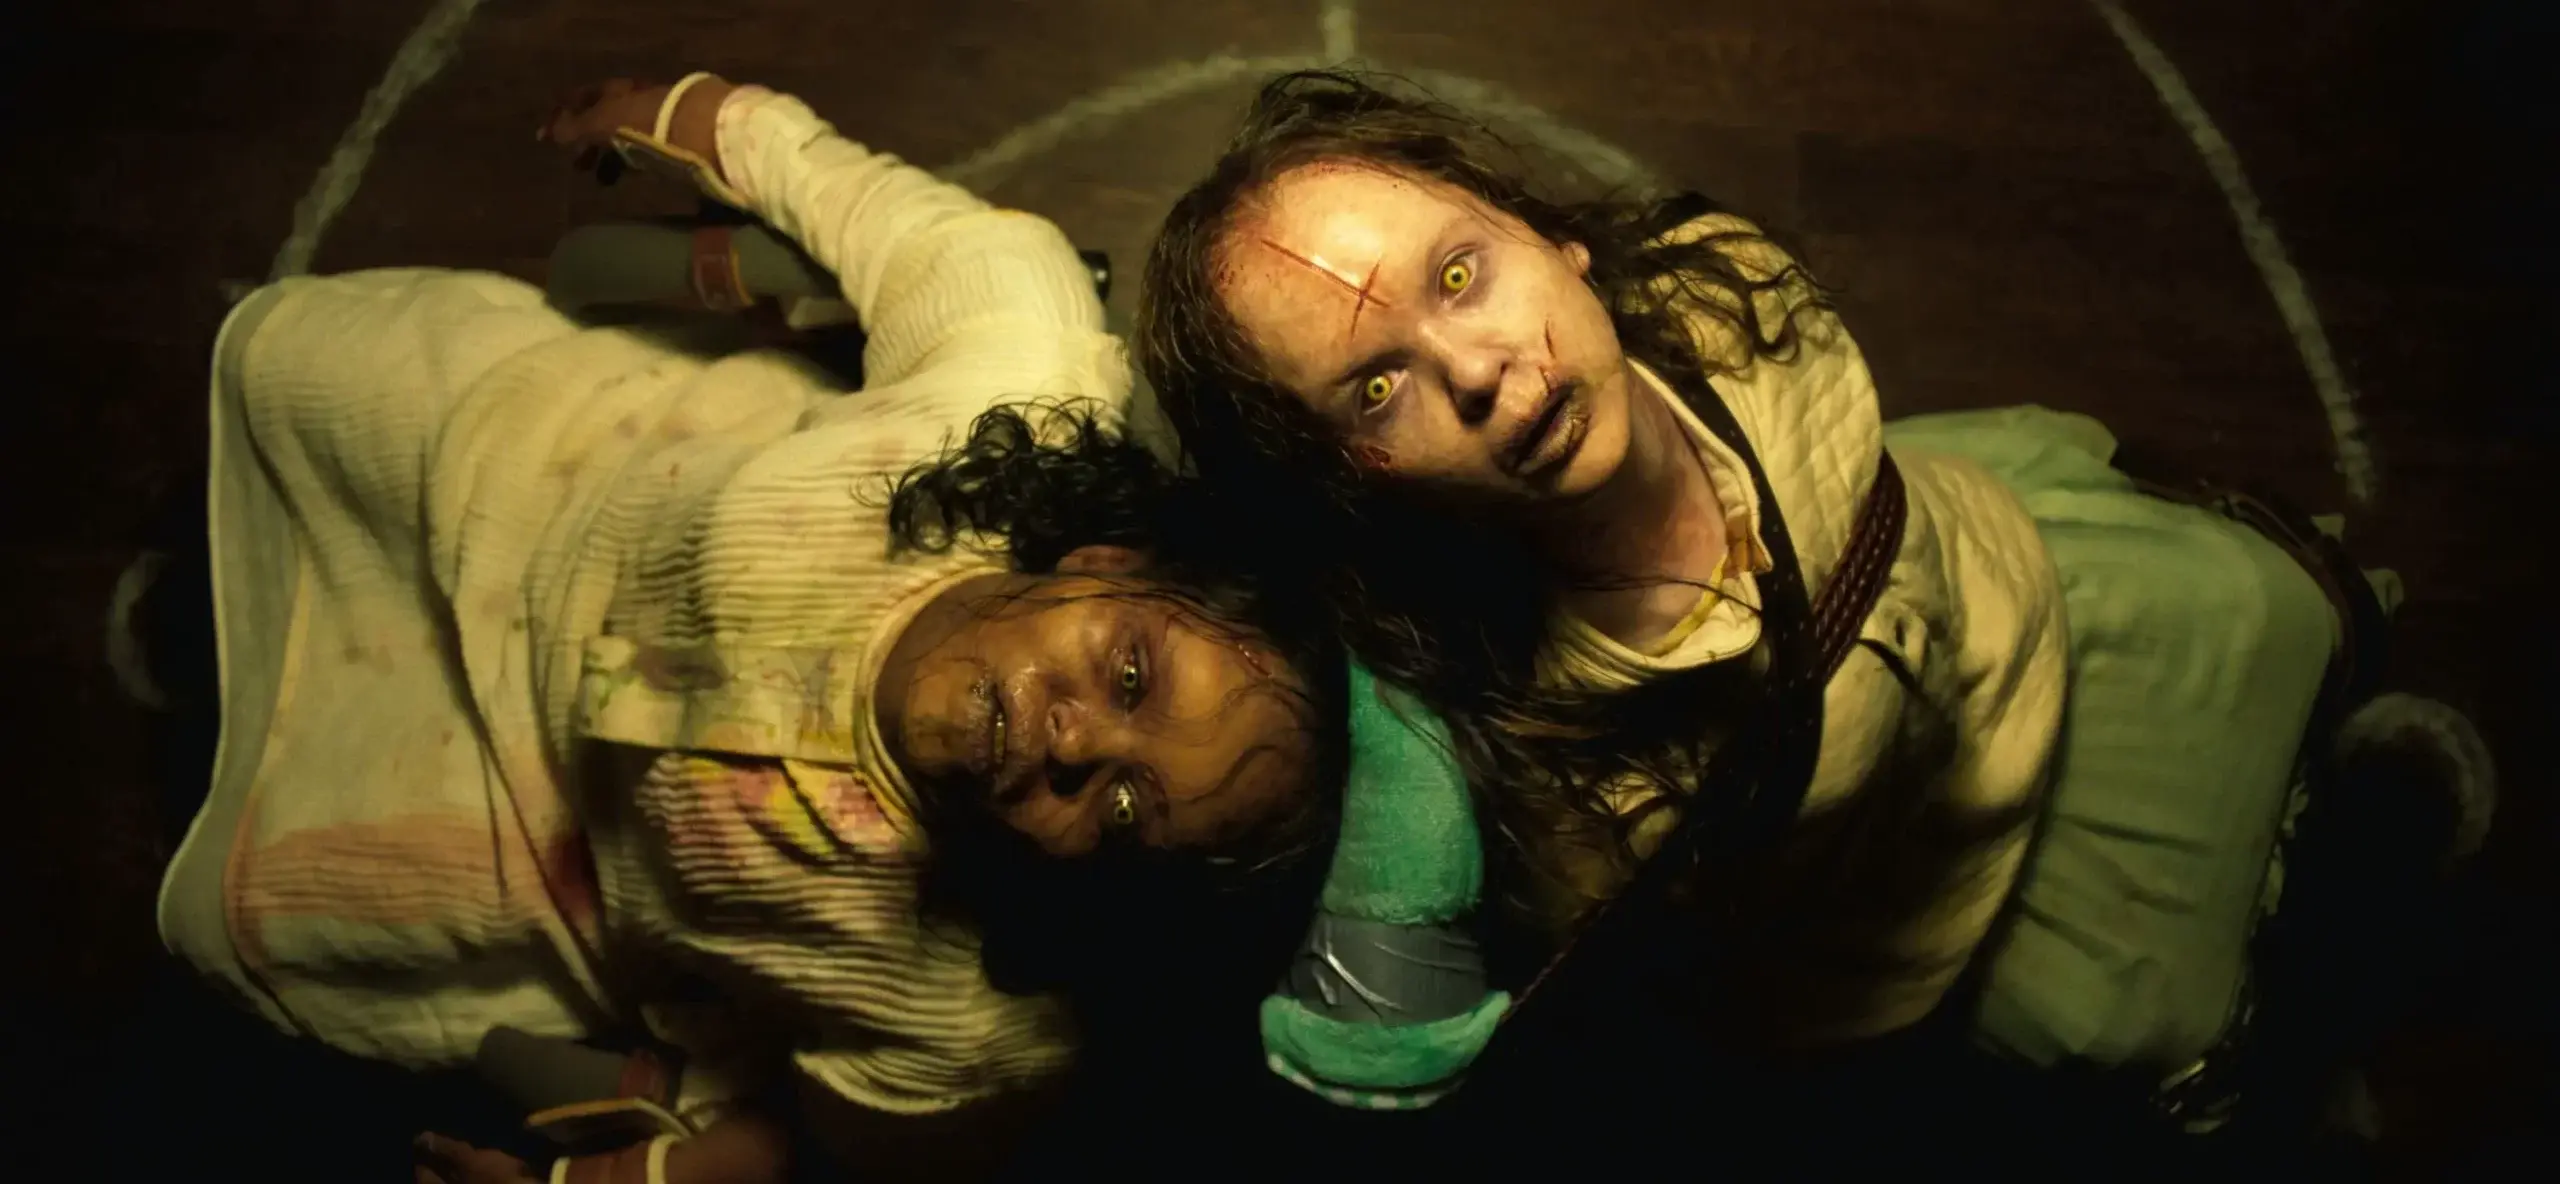 ‘Exorcist: Believer’ Should Be Dragged To Hell, But There Is A Saving Grace